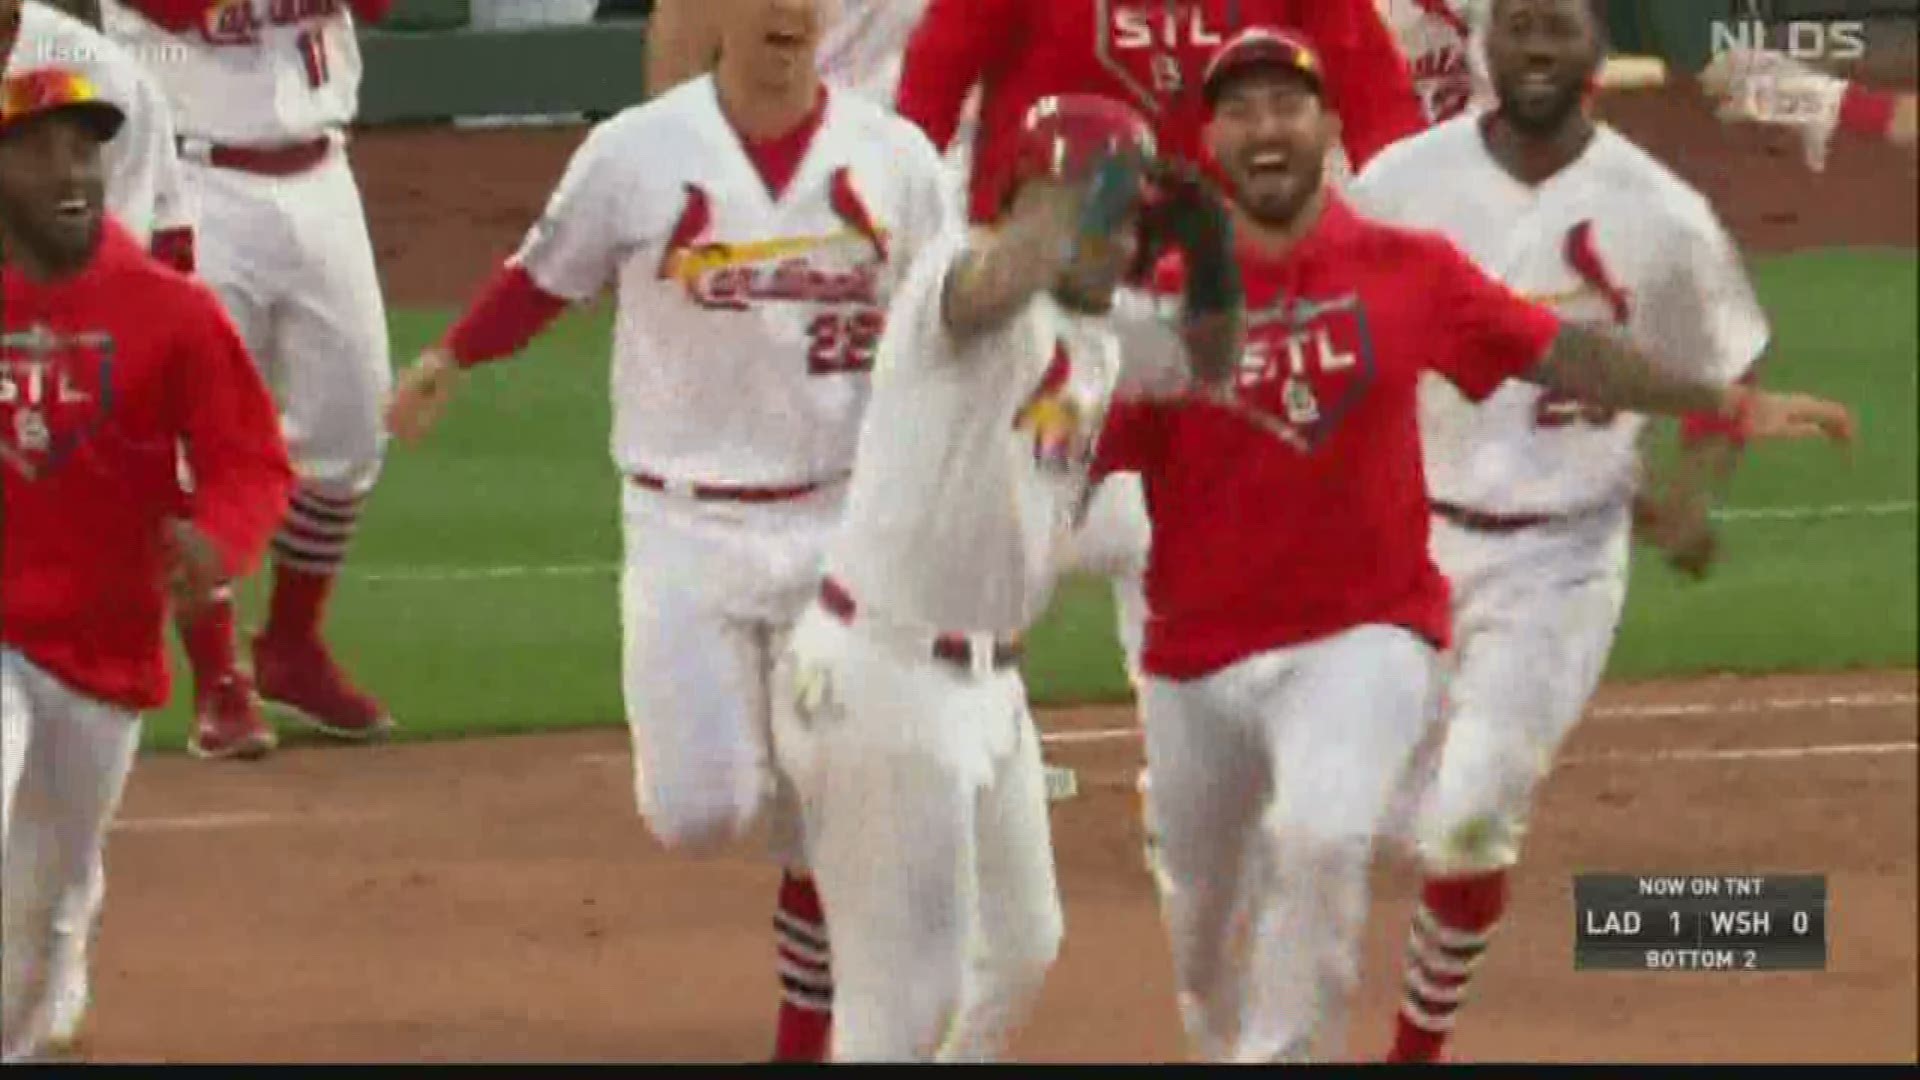 Yadier Molina wins it in 10th, as Cardinals top Braves to force Game 5 –  The Denver Post